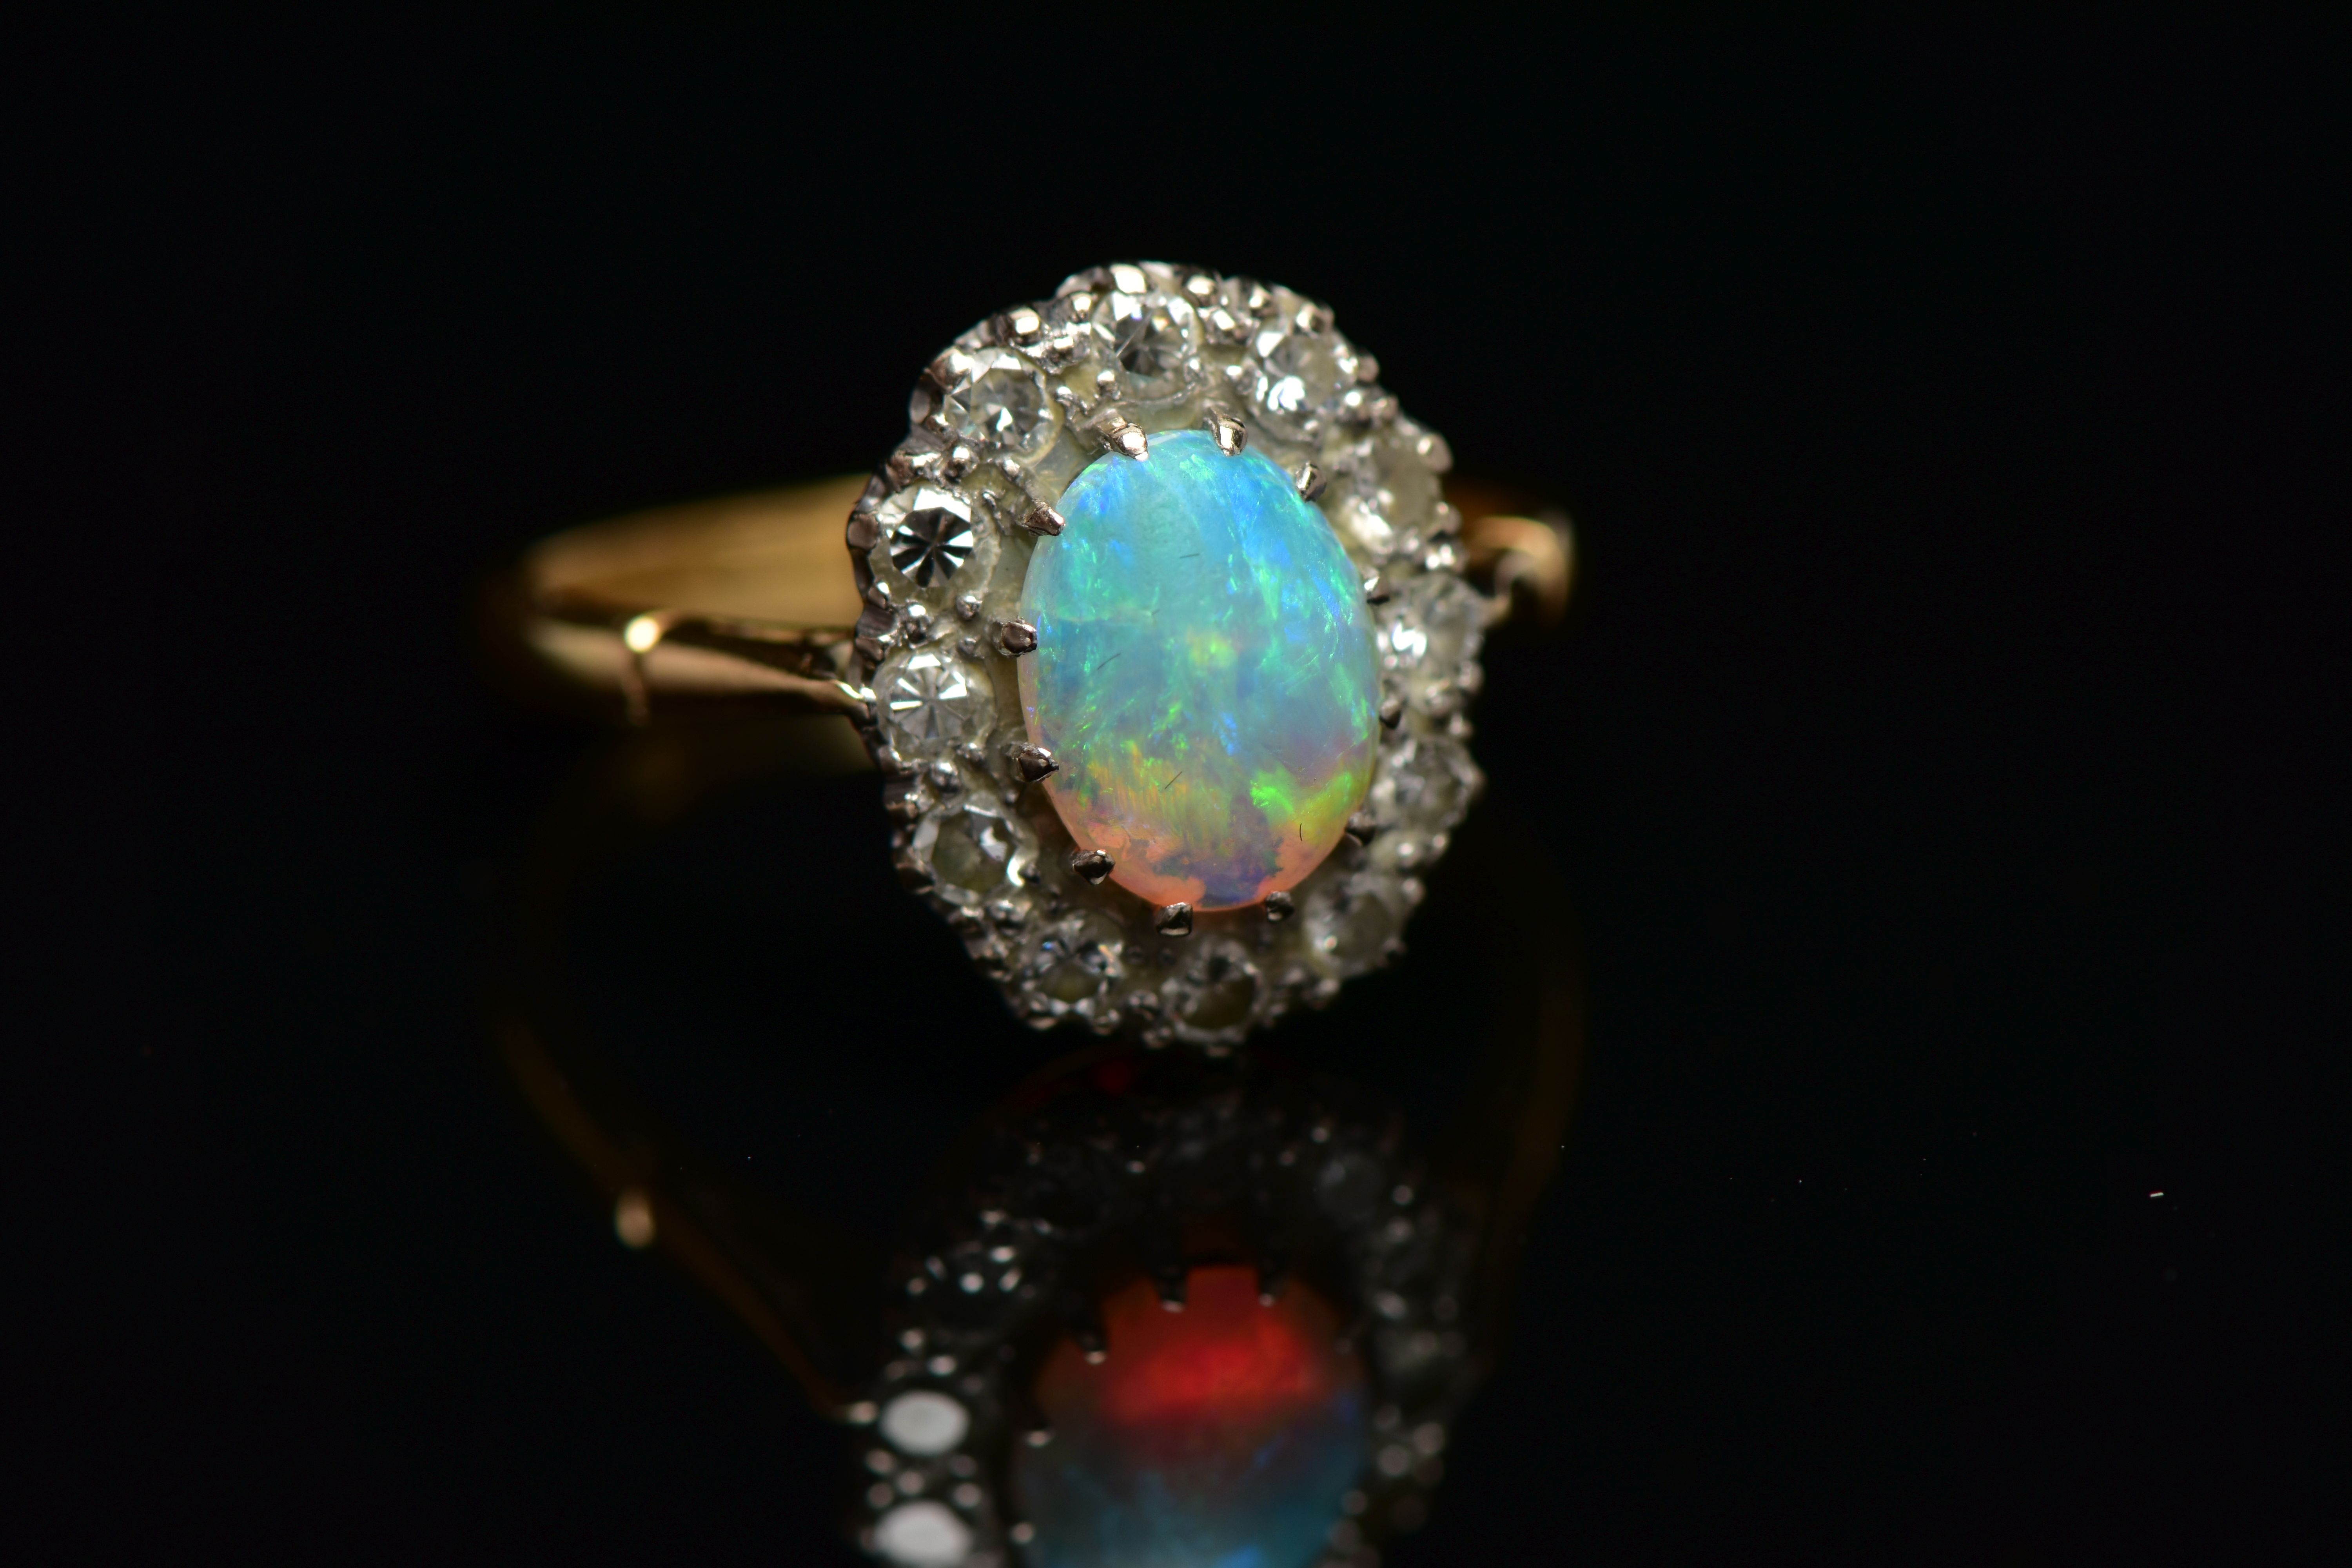 AN OPAL AND DIAMOND CLUSTER RING, set with an oval opal cabochon, measuring approximately 8.2mm x - Image 8 of 10